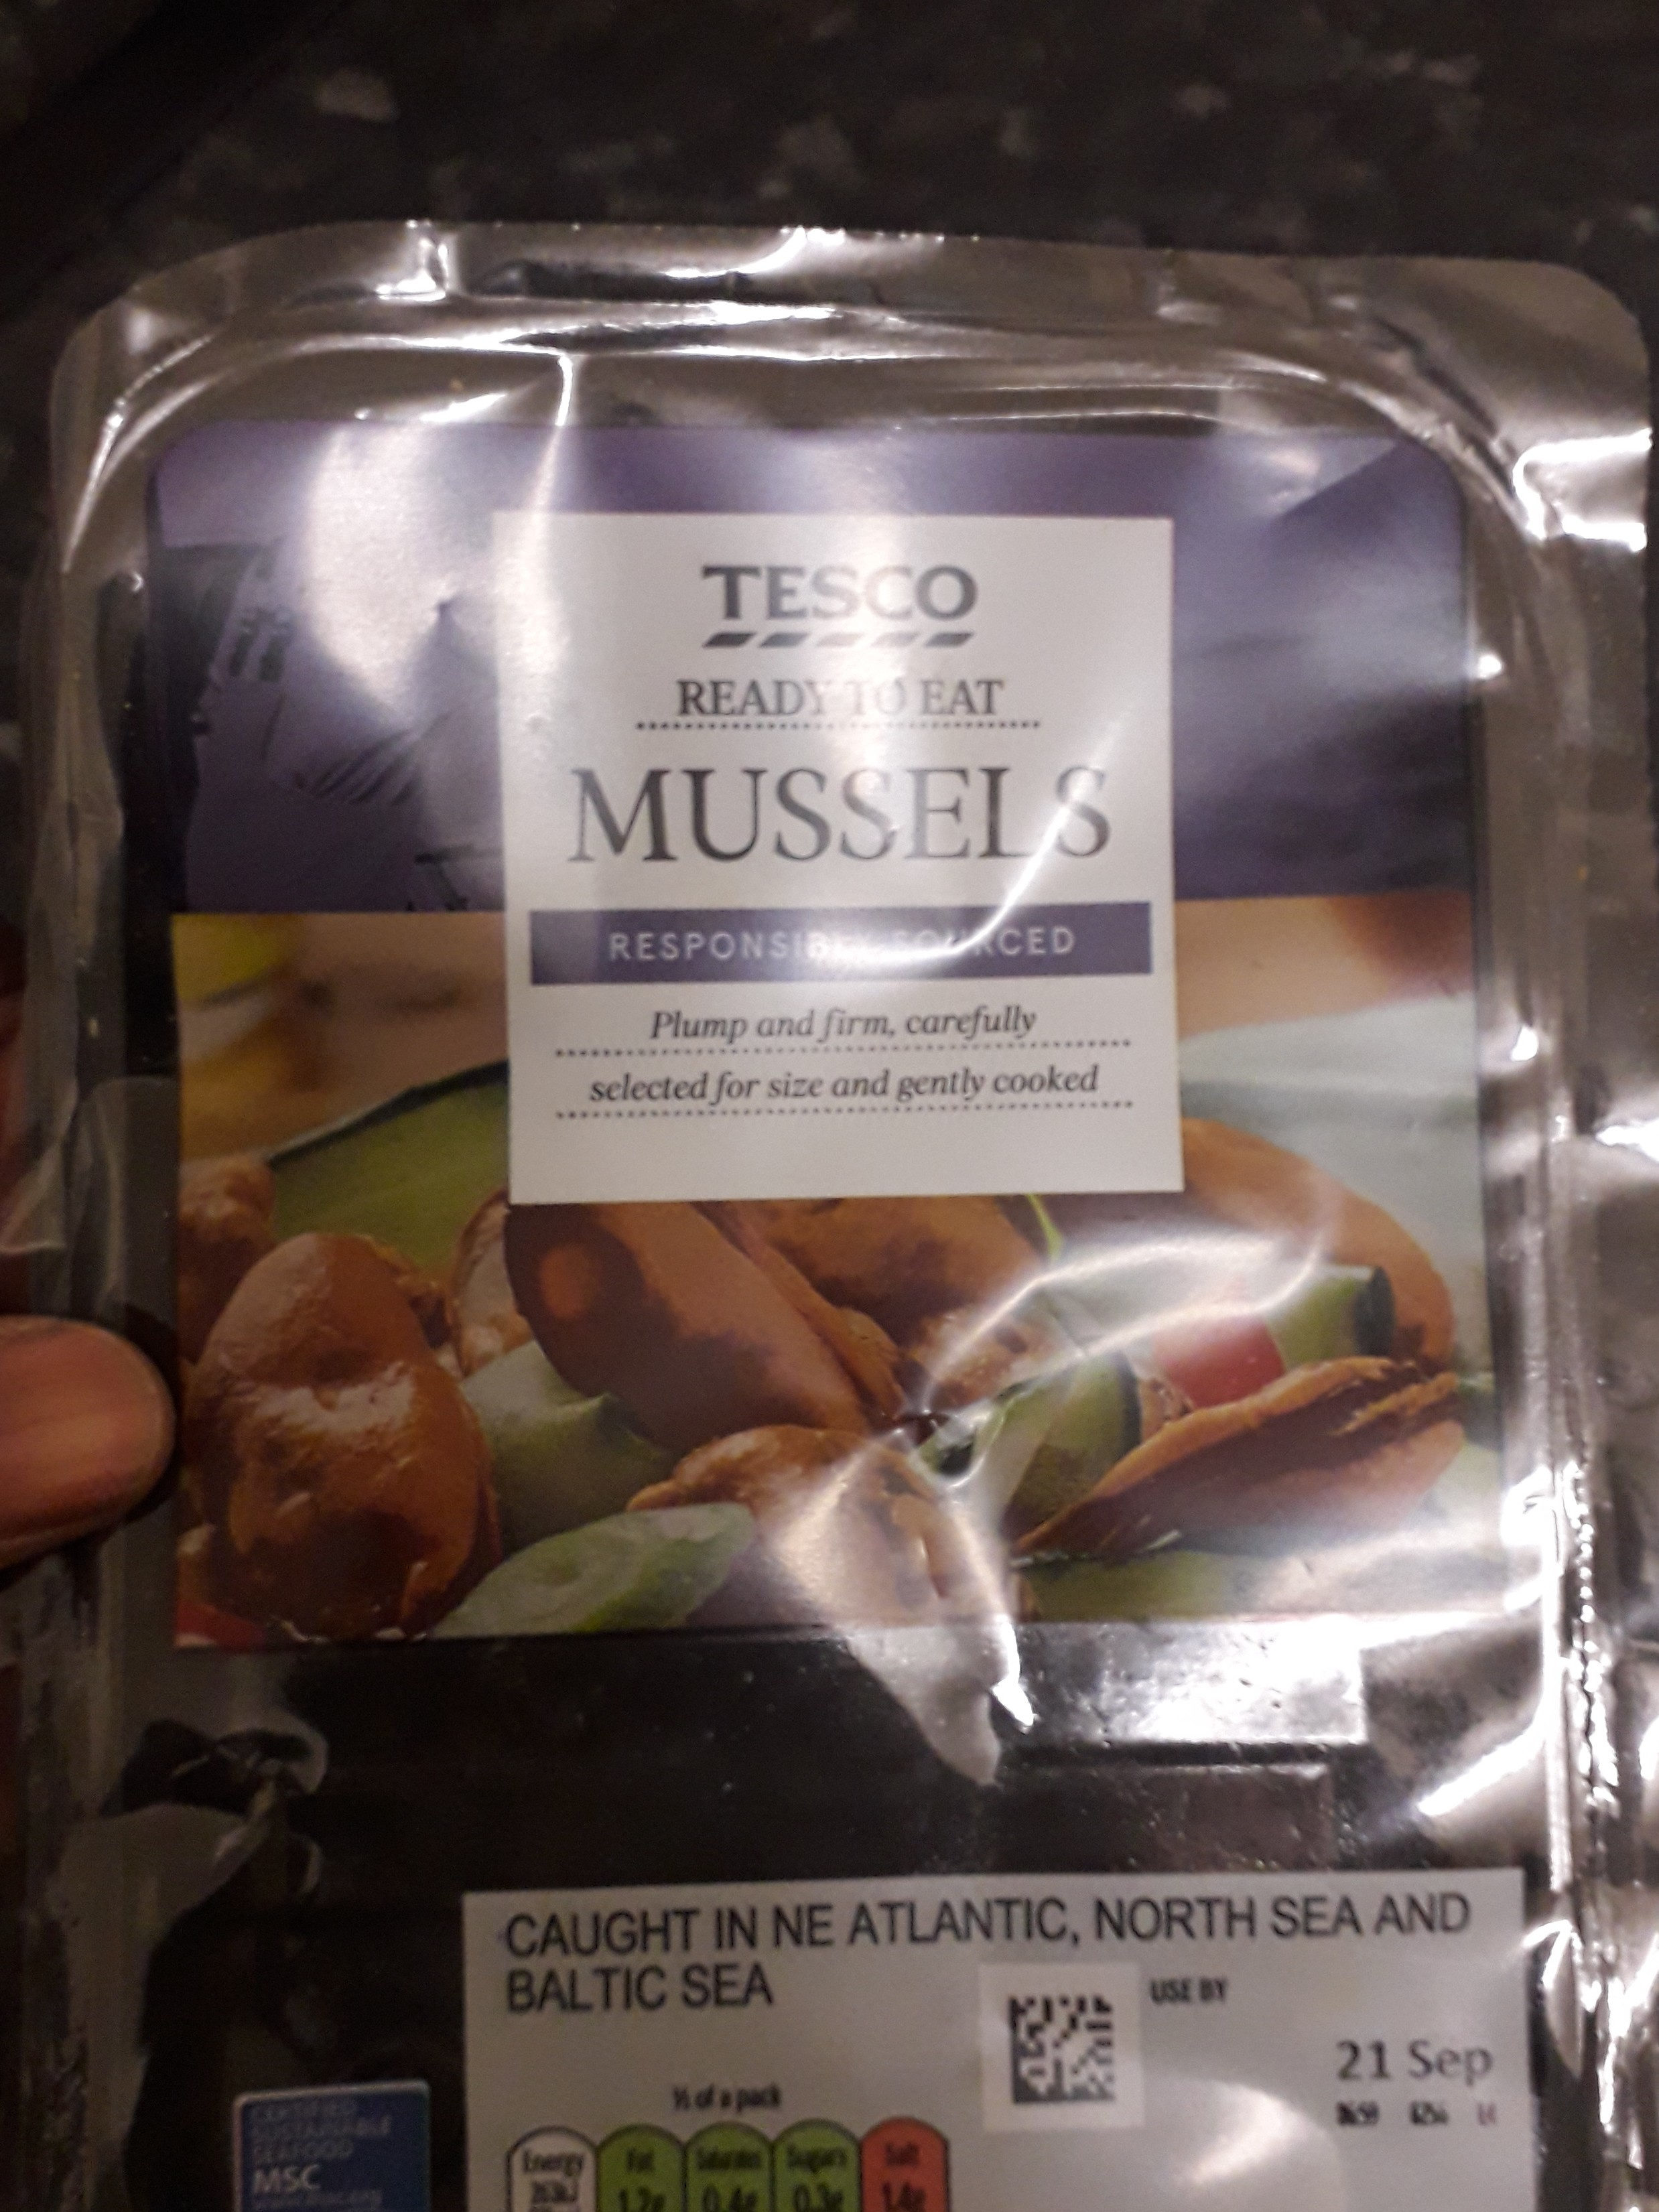 Tesco mussels - Product